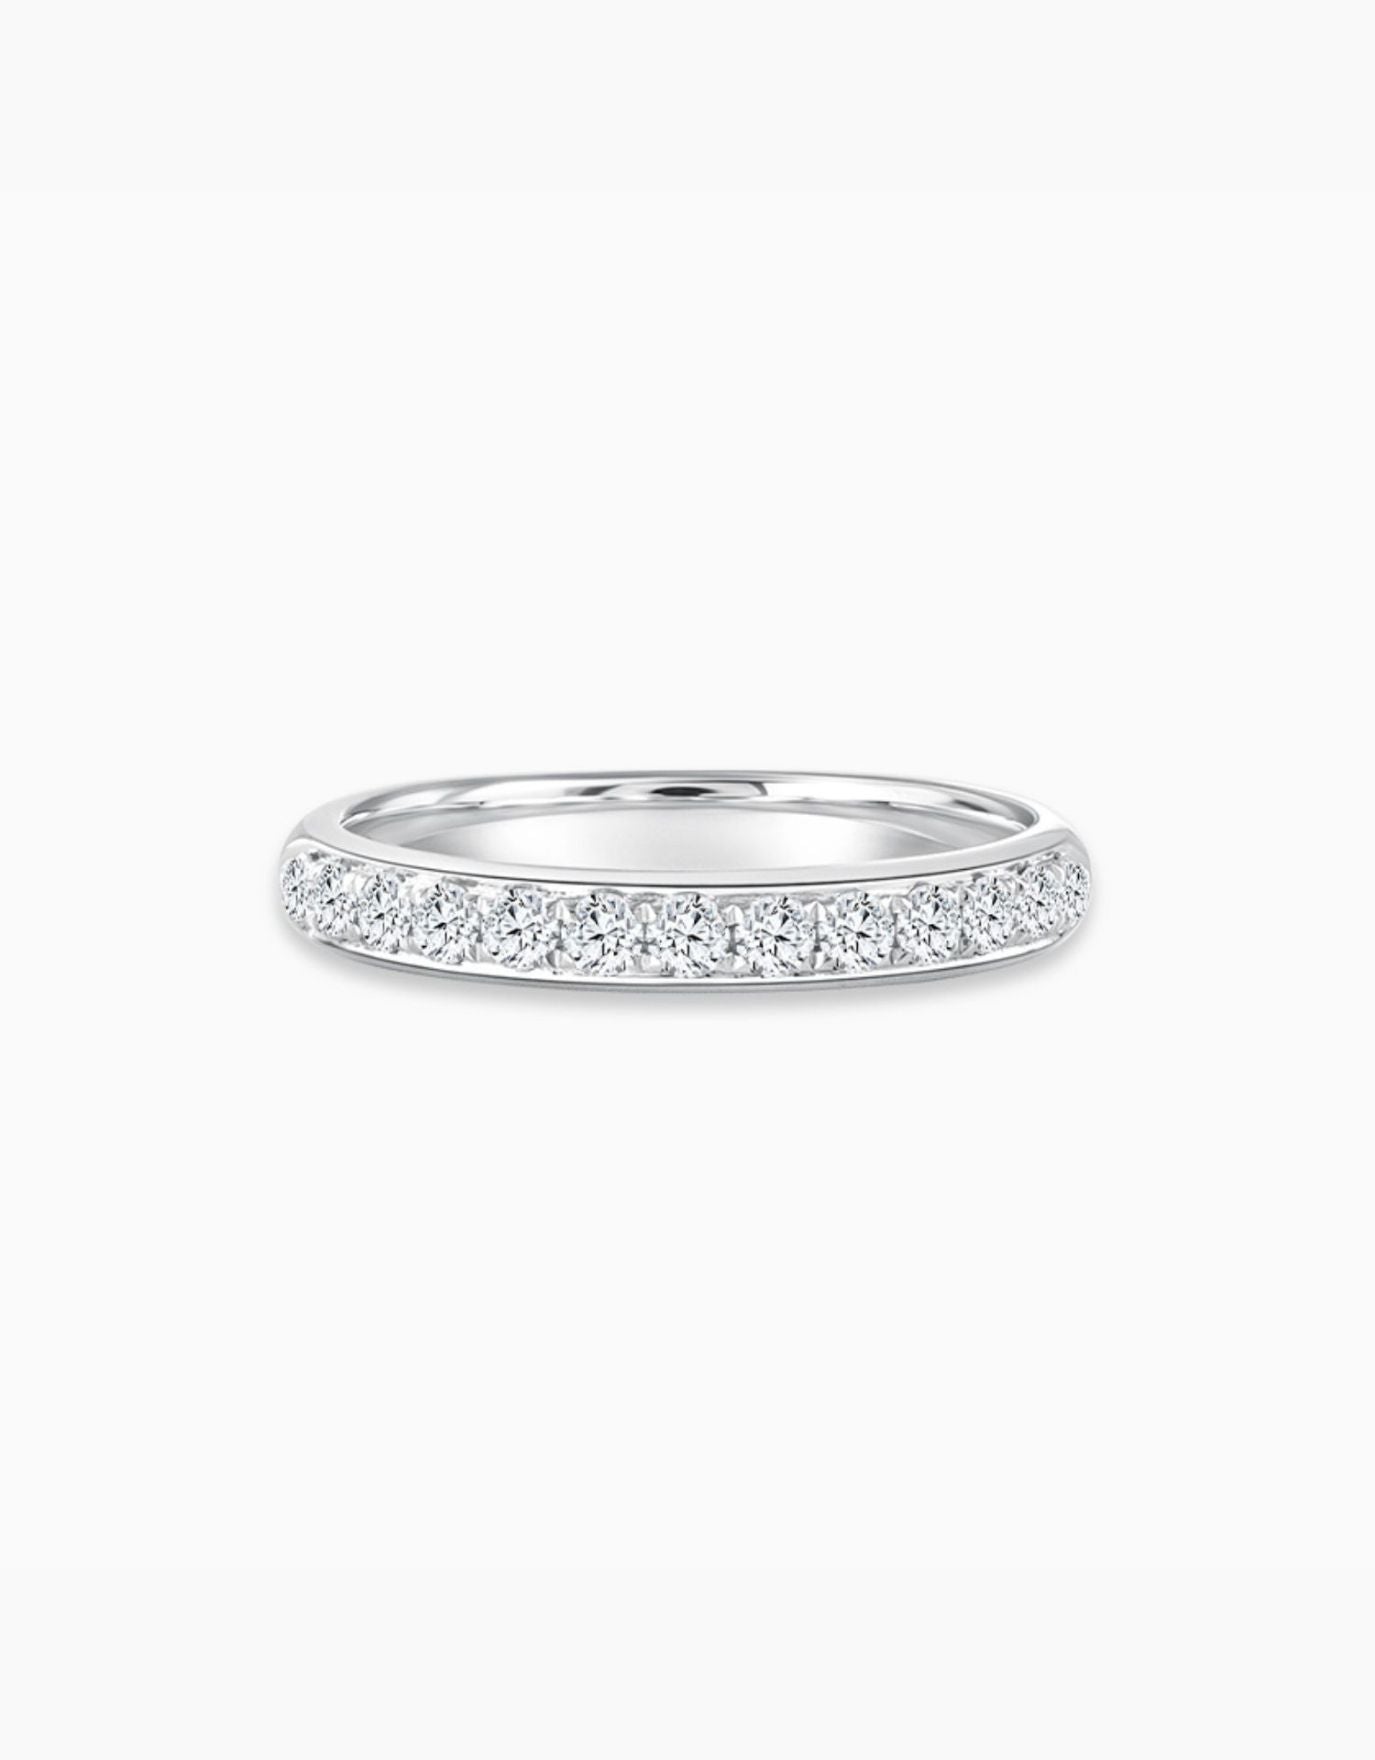 LVC Purete Diamond Wedding Band with Pave Settings in Platinum